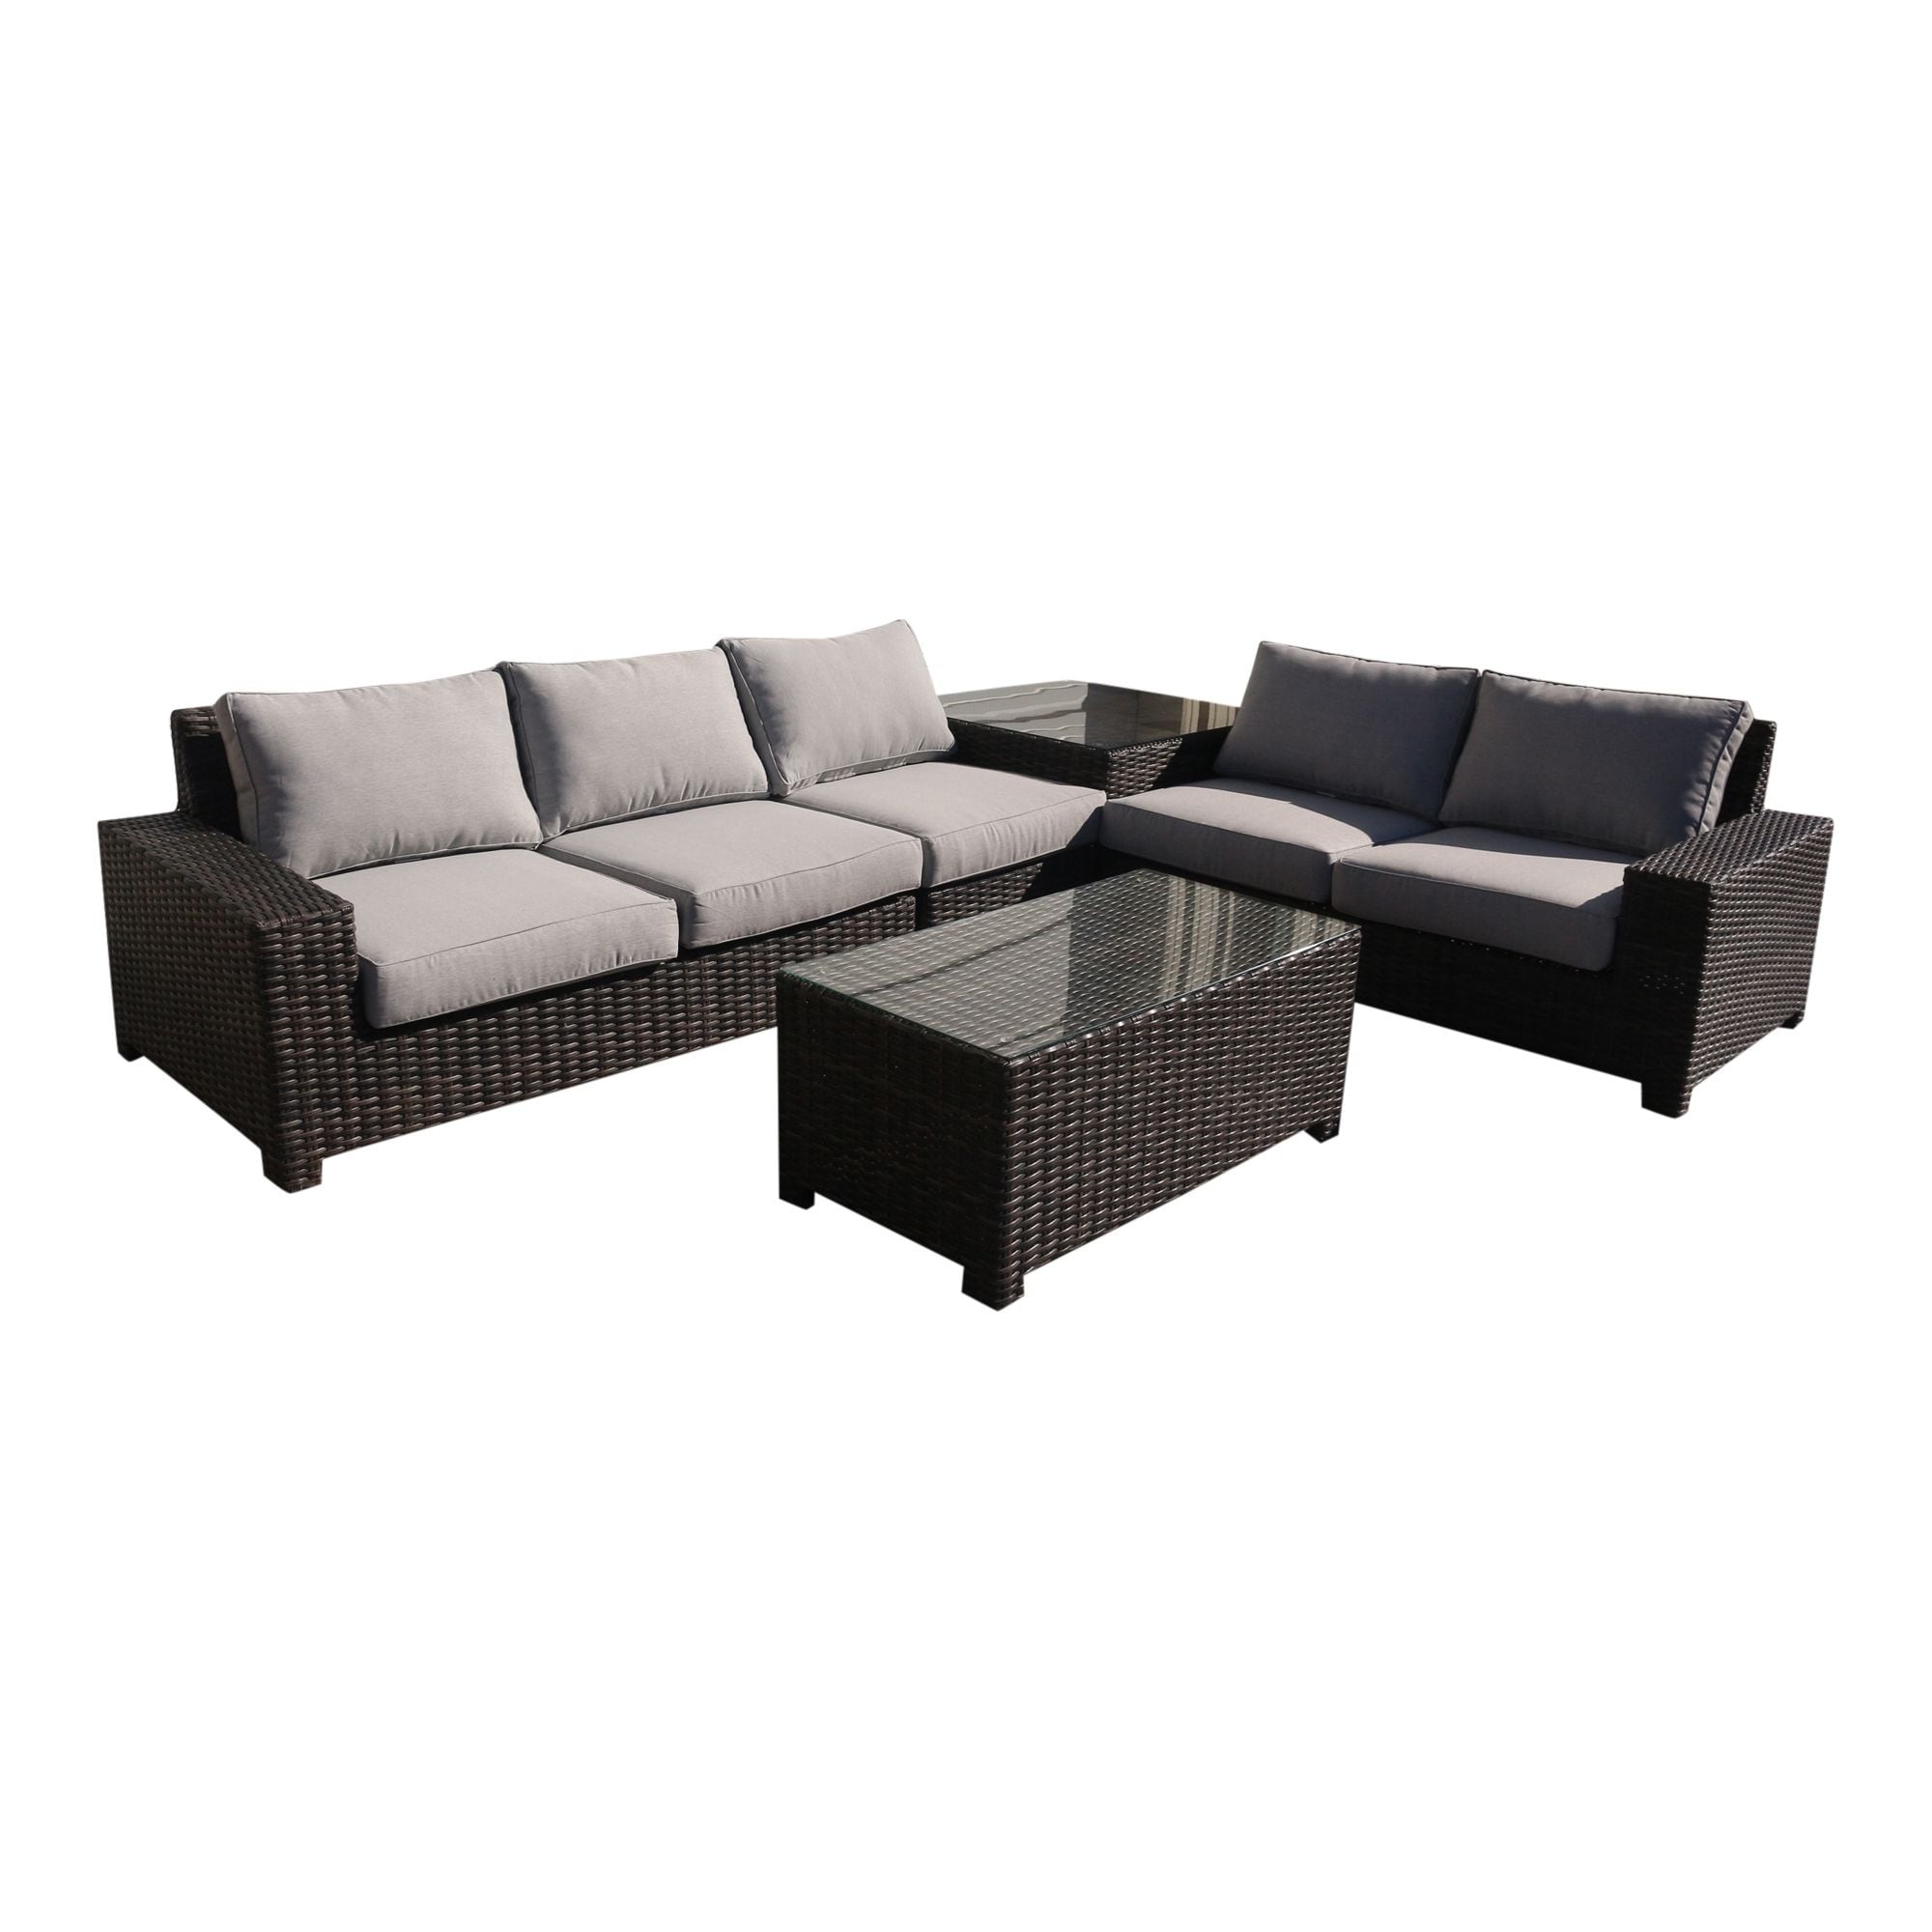 Courtyard Casual St Lucia 5 Piece Sectional Set With 1 Left And 1 Right Loveseats  1 Middle Chair  1 Corner Table And 1 Table